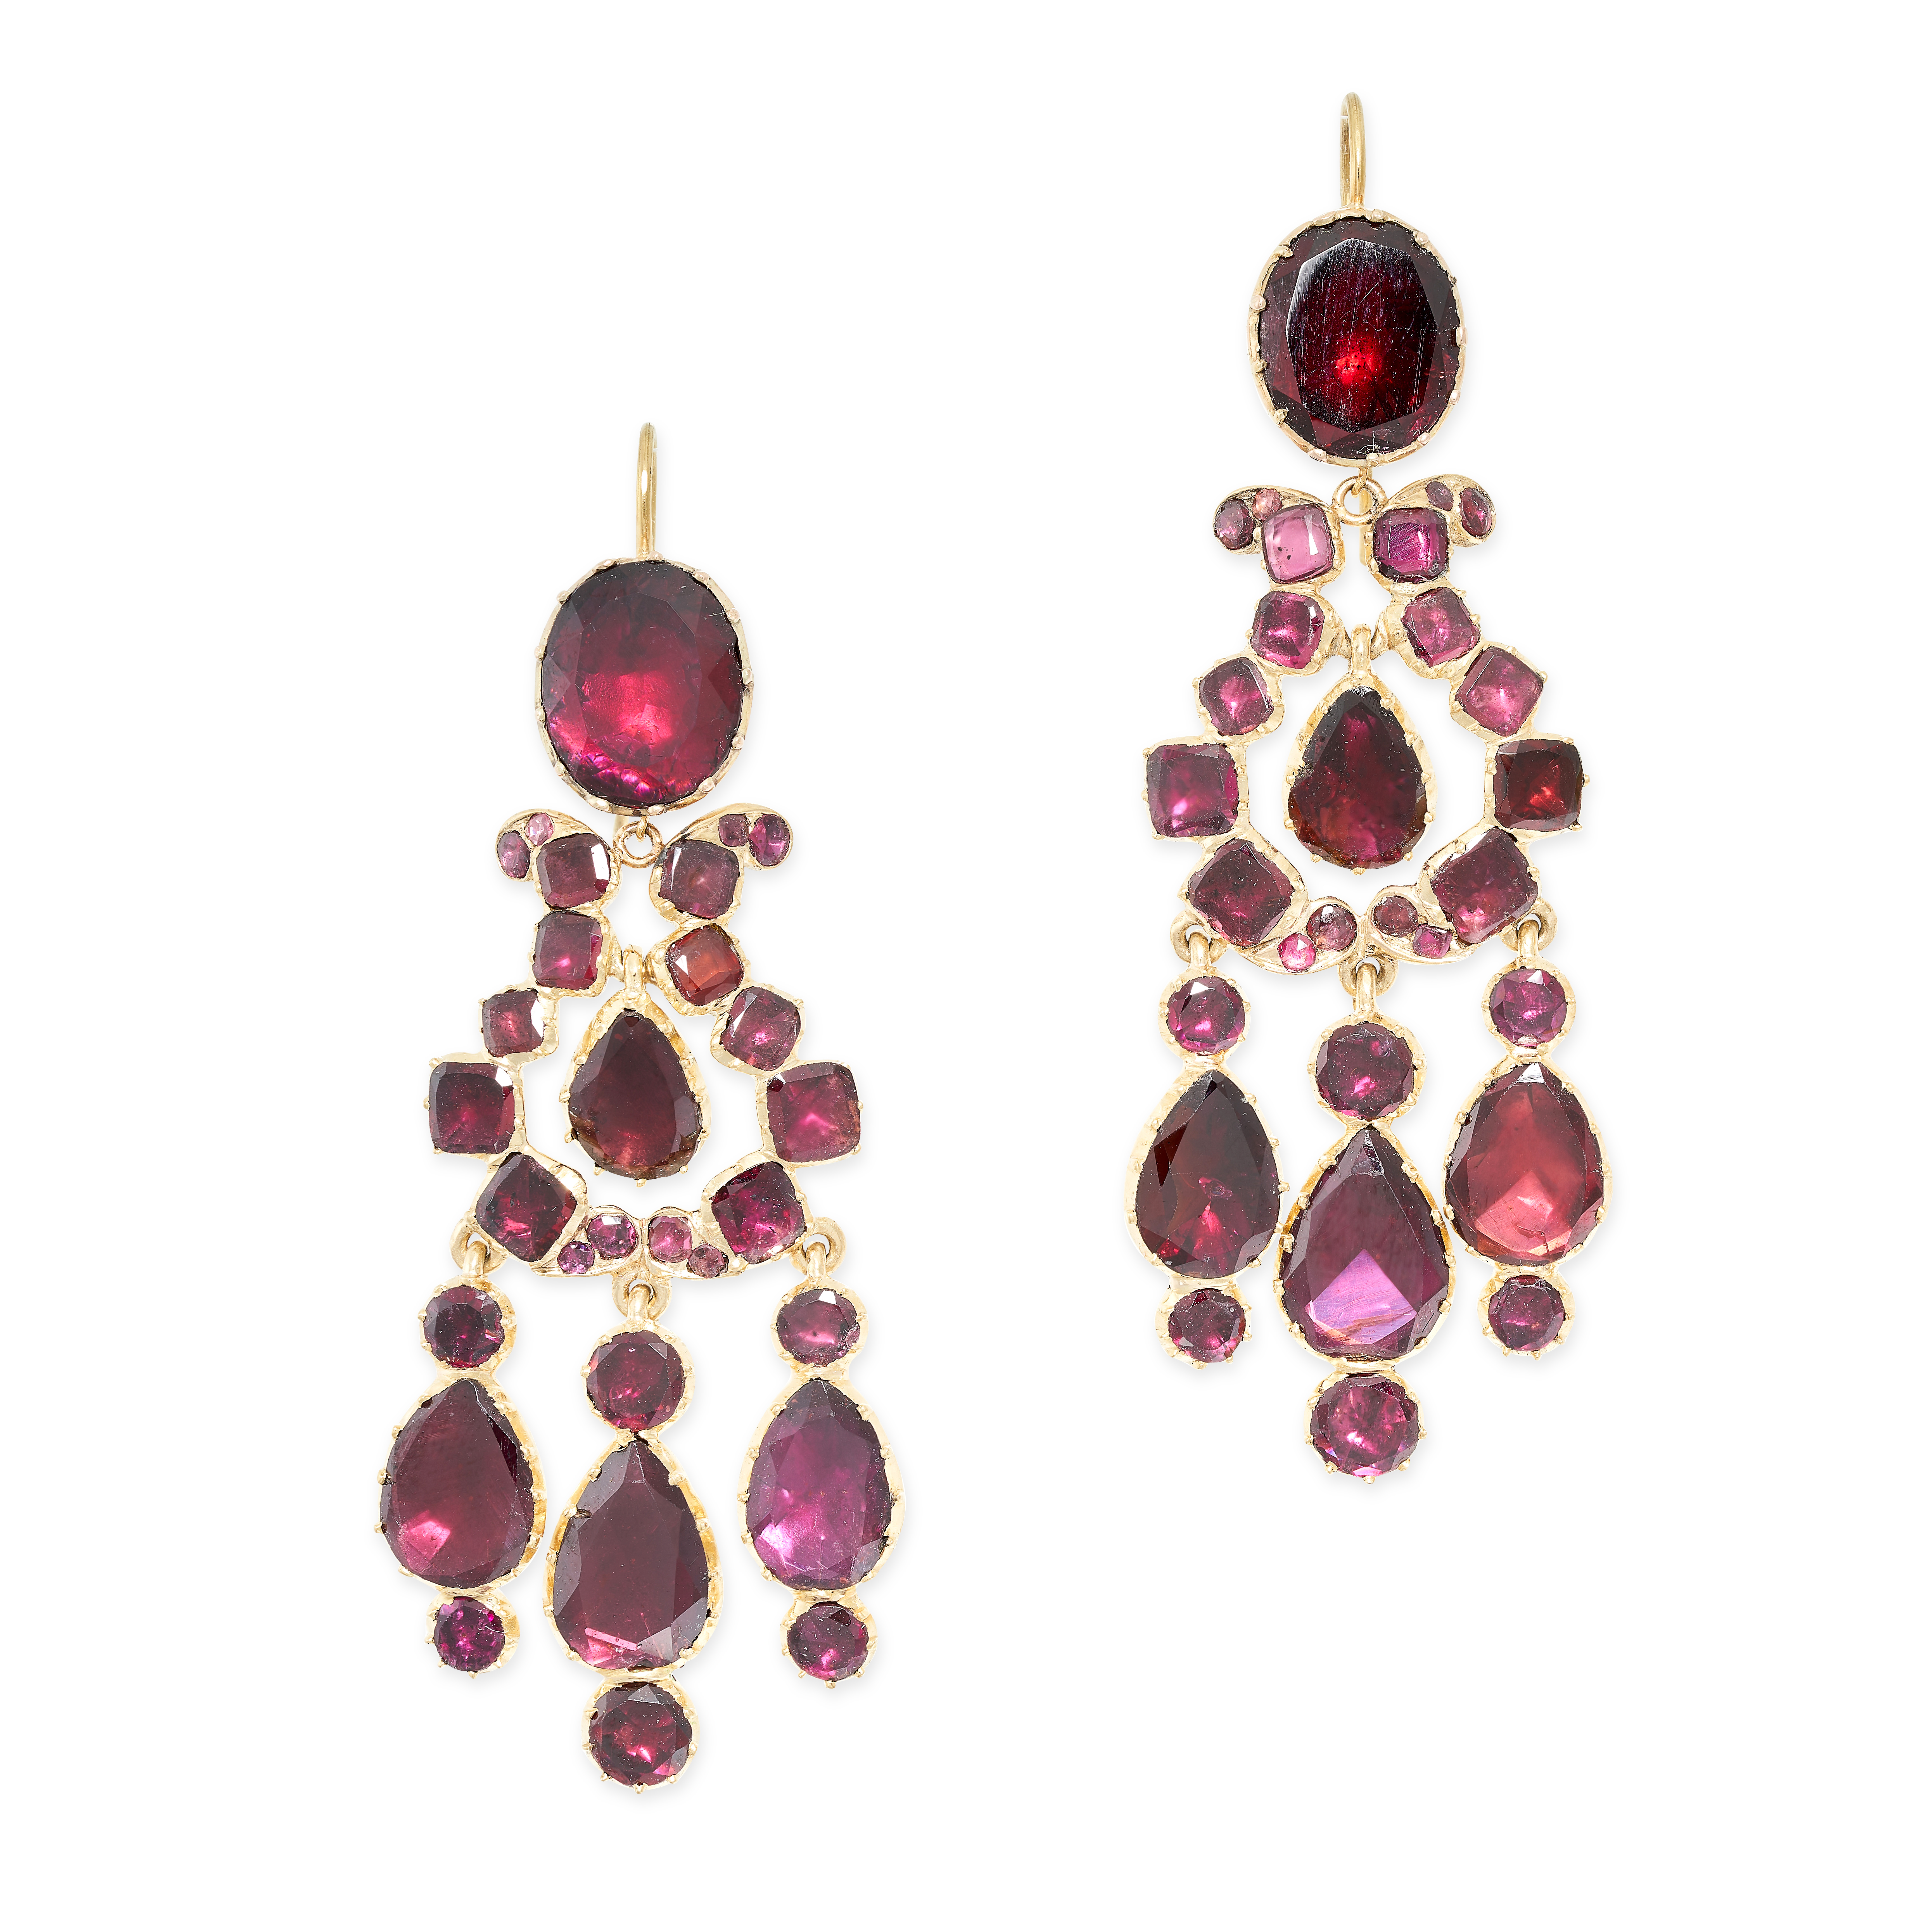 A PAIR OF FINE ANTIQUE GARNET CHANDELIER EARRINGS, 19TH CENTURY in yellow gold, each set with square